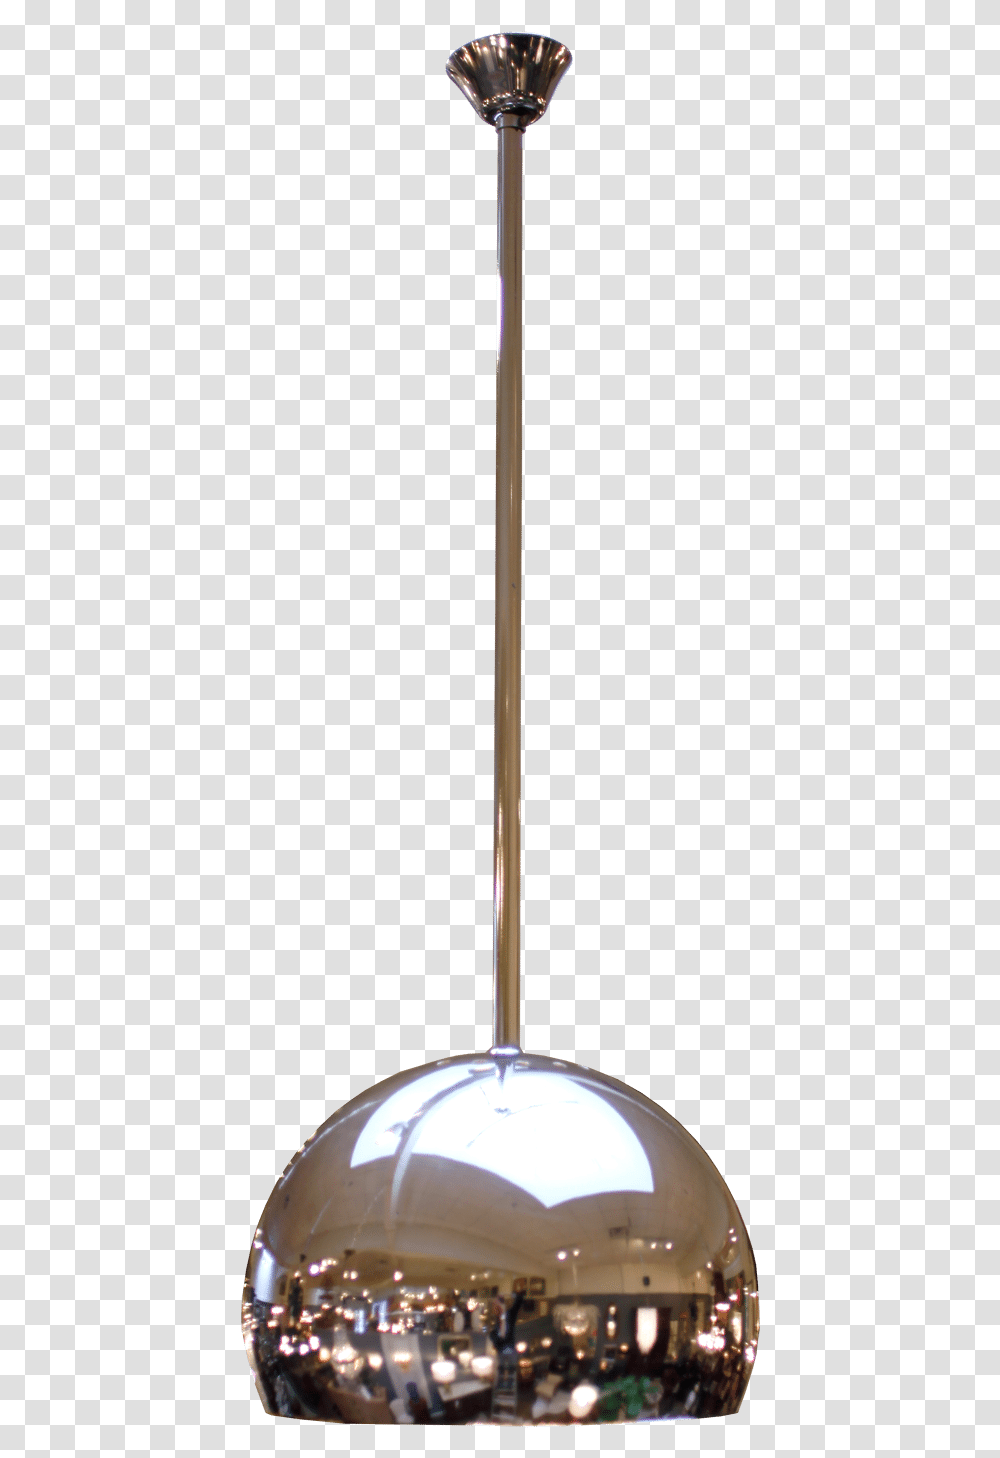 Ball Of Light Putter, Weapon, Weaponry, Lamp Transparent Png